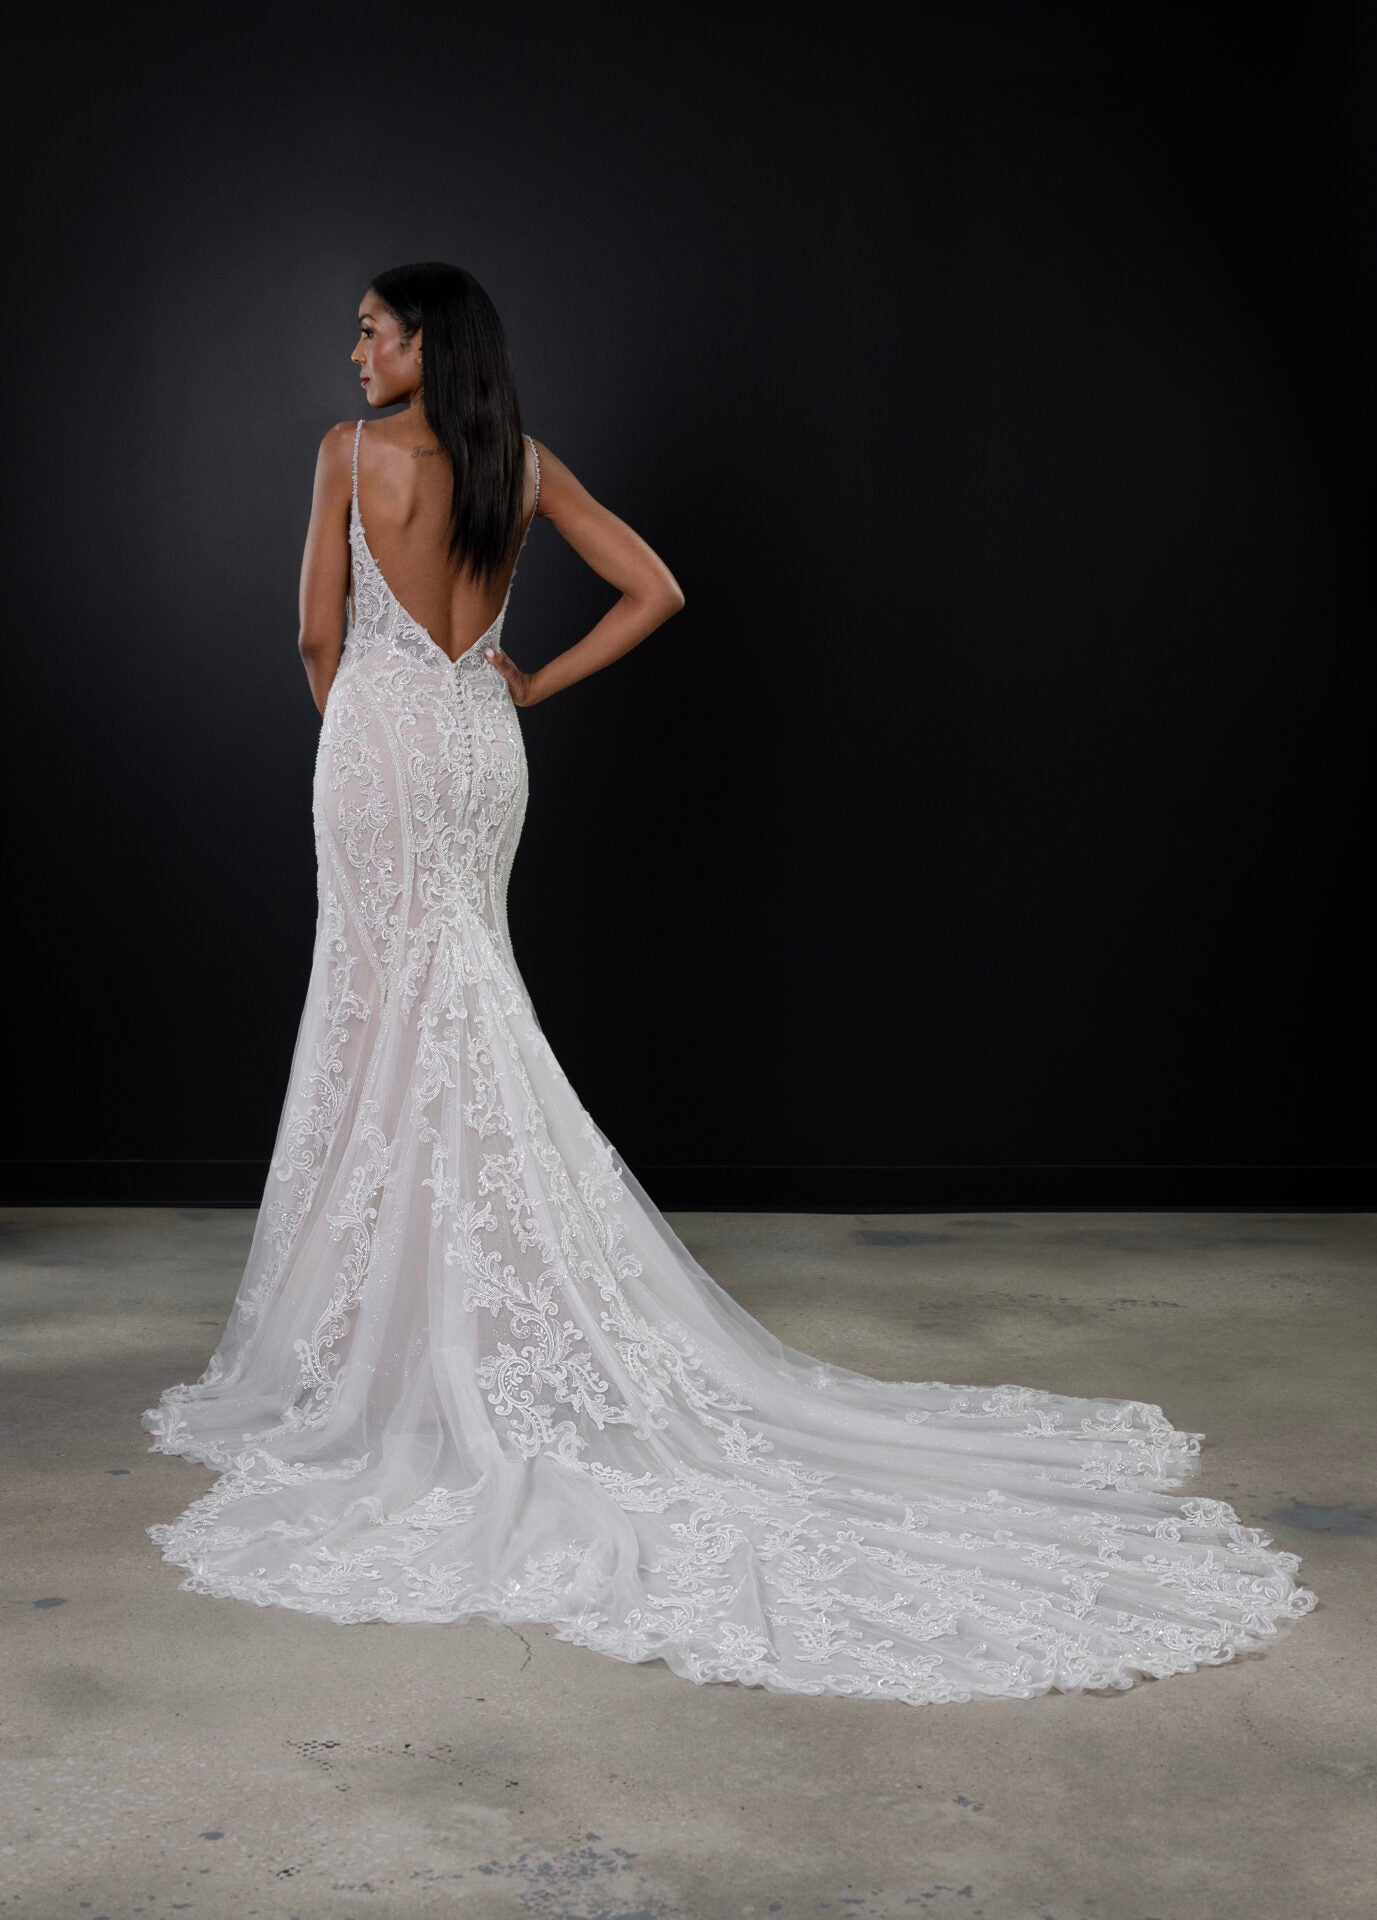 Lace Fit-and-Flare Gown With Open Back by Martina Liana - Image 3